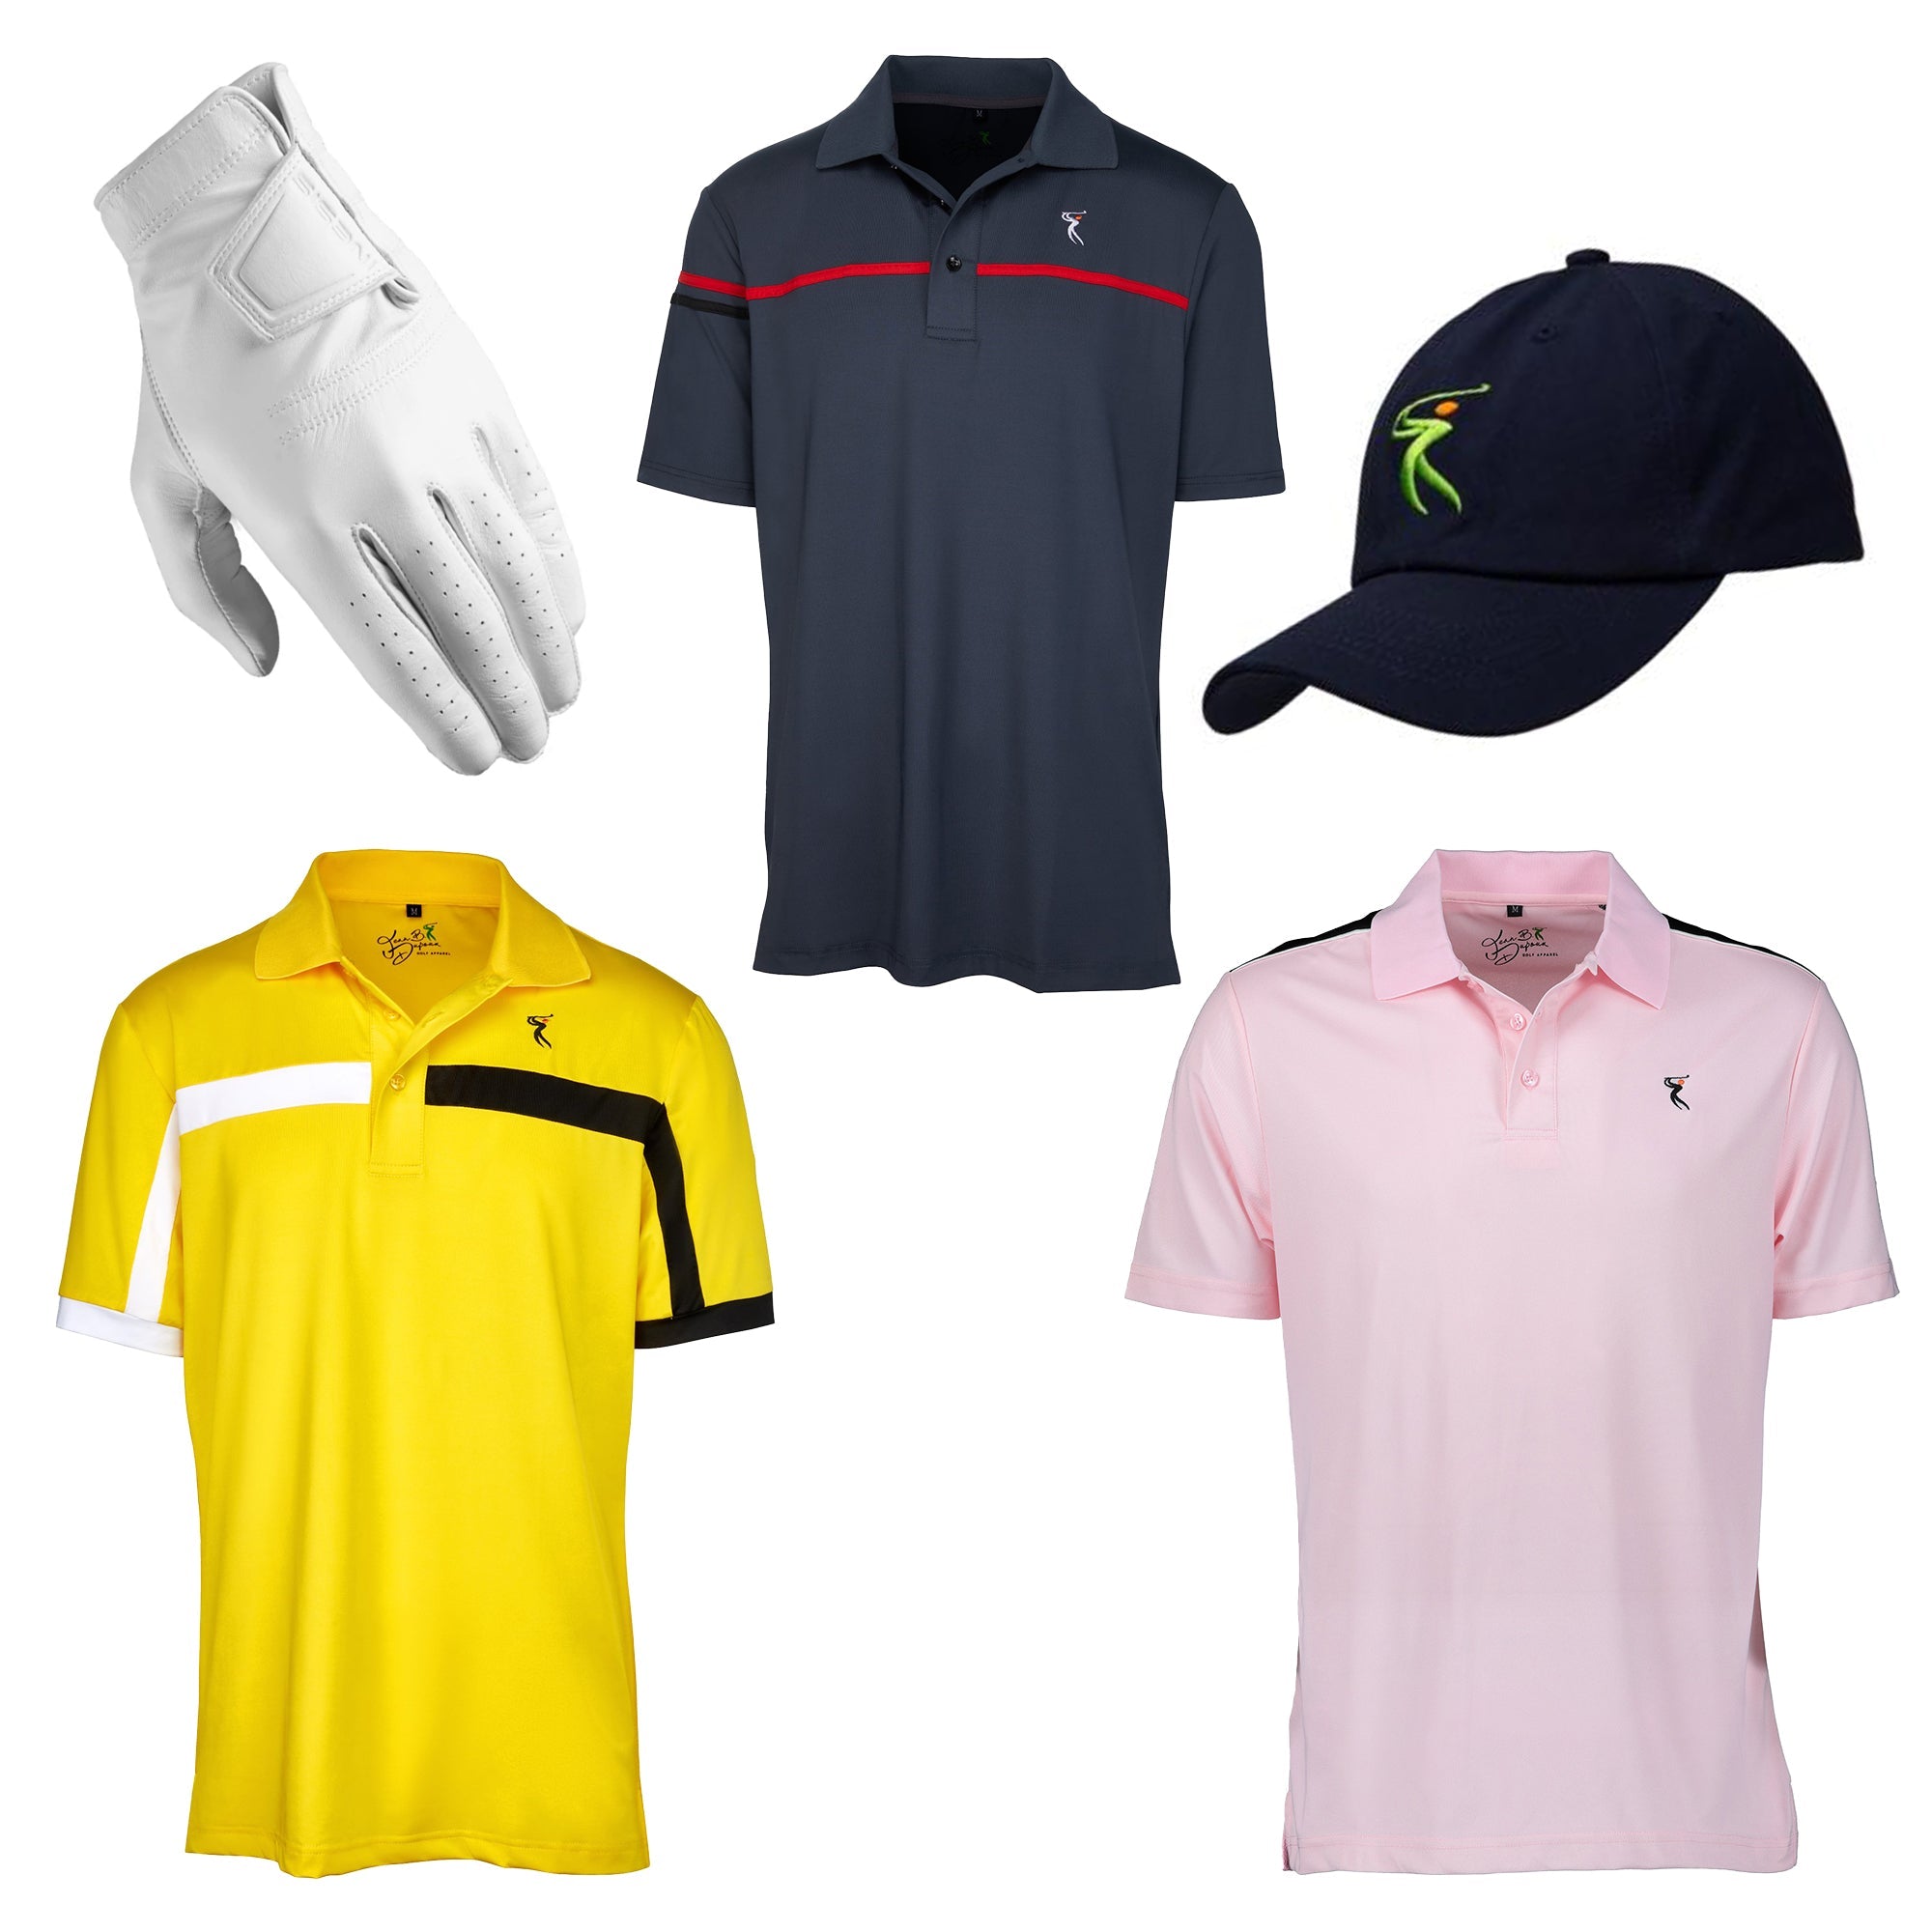 Pack of 3 - Men's Golf Shirt Combo (Get Golf Hat & Leather Glove For FREE!!!)